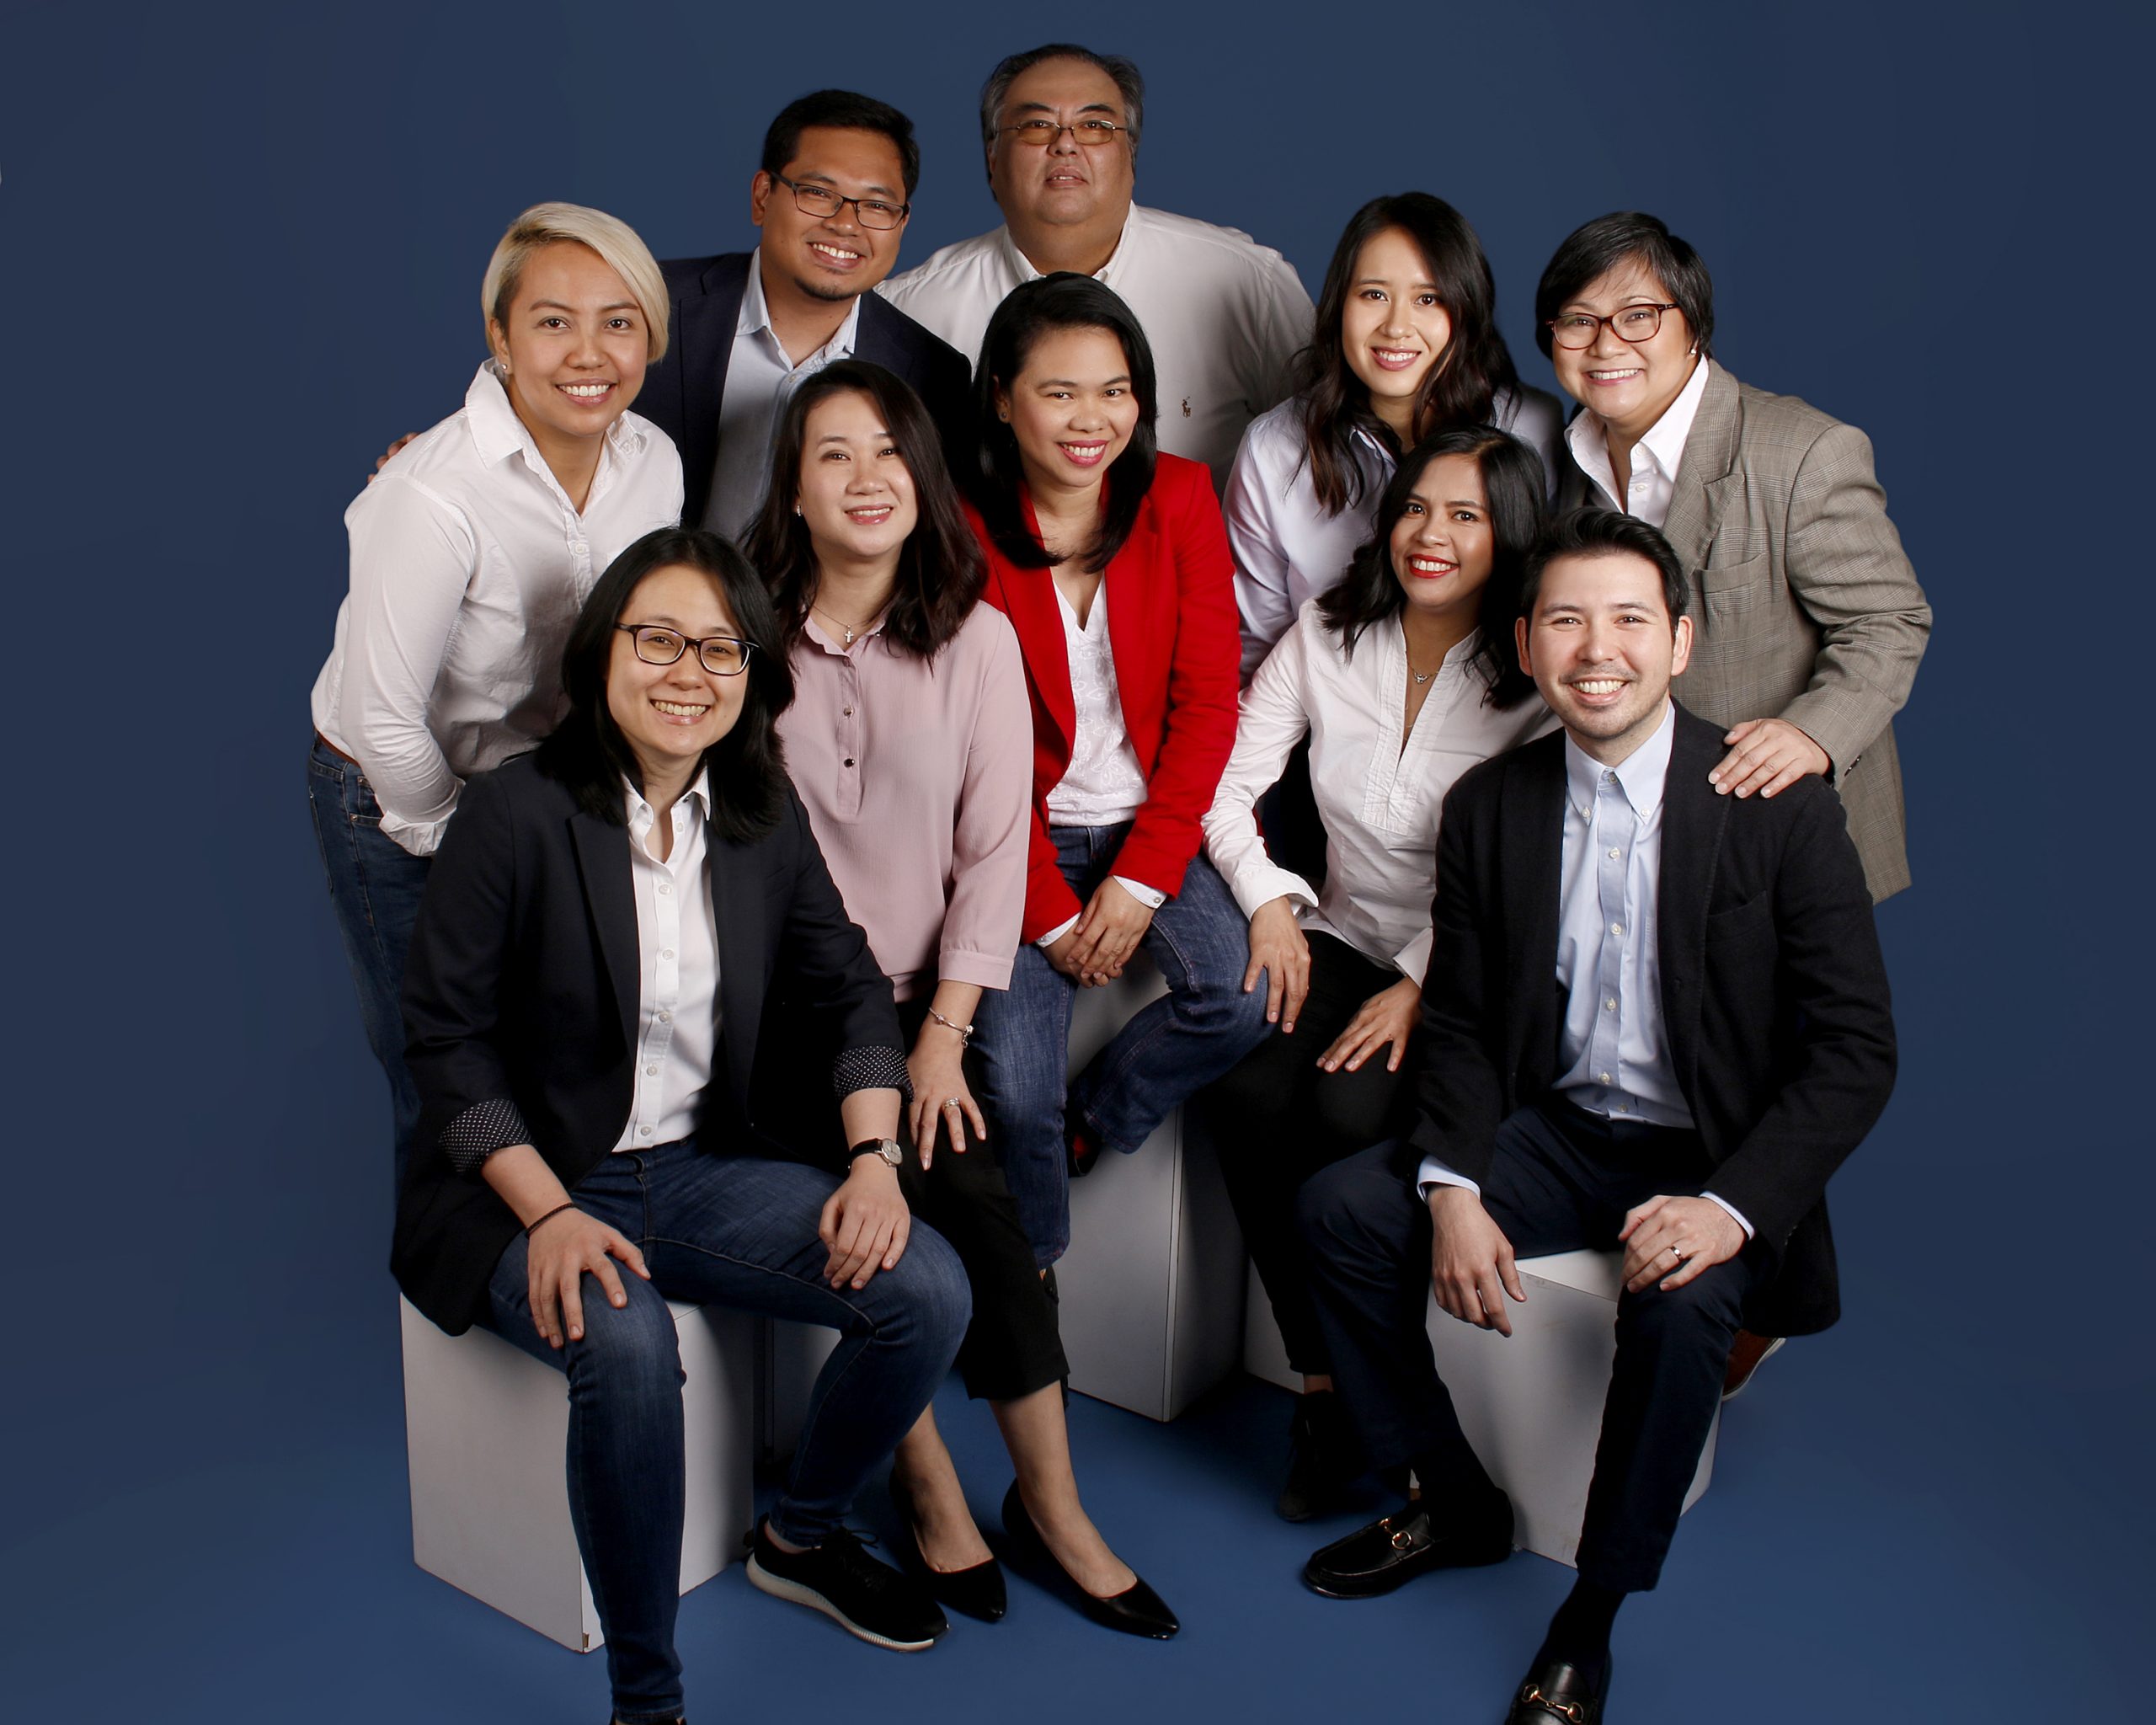 Digital businesses have exploded in the Philippines: Q&A with Kickstart Ventures’ Bit Santos